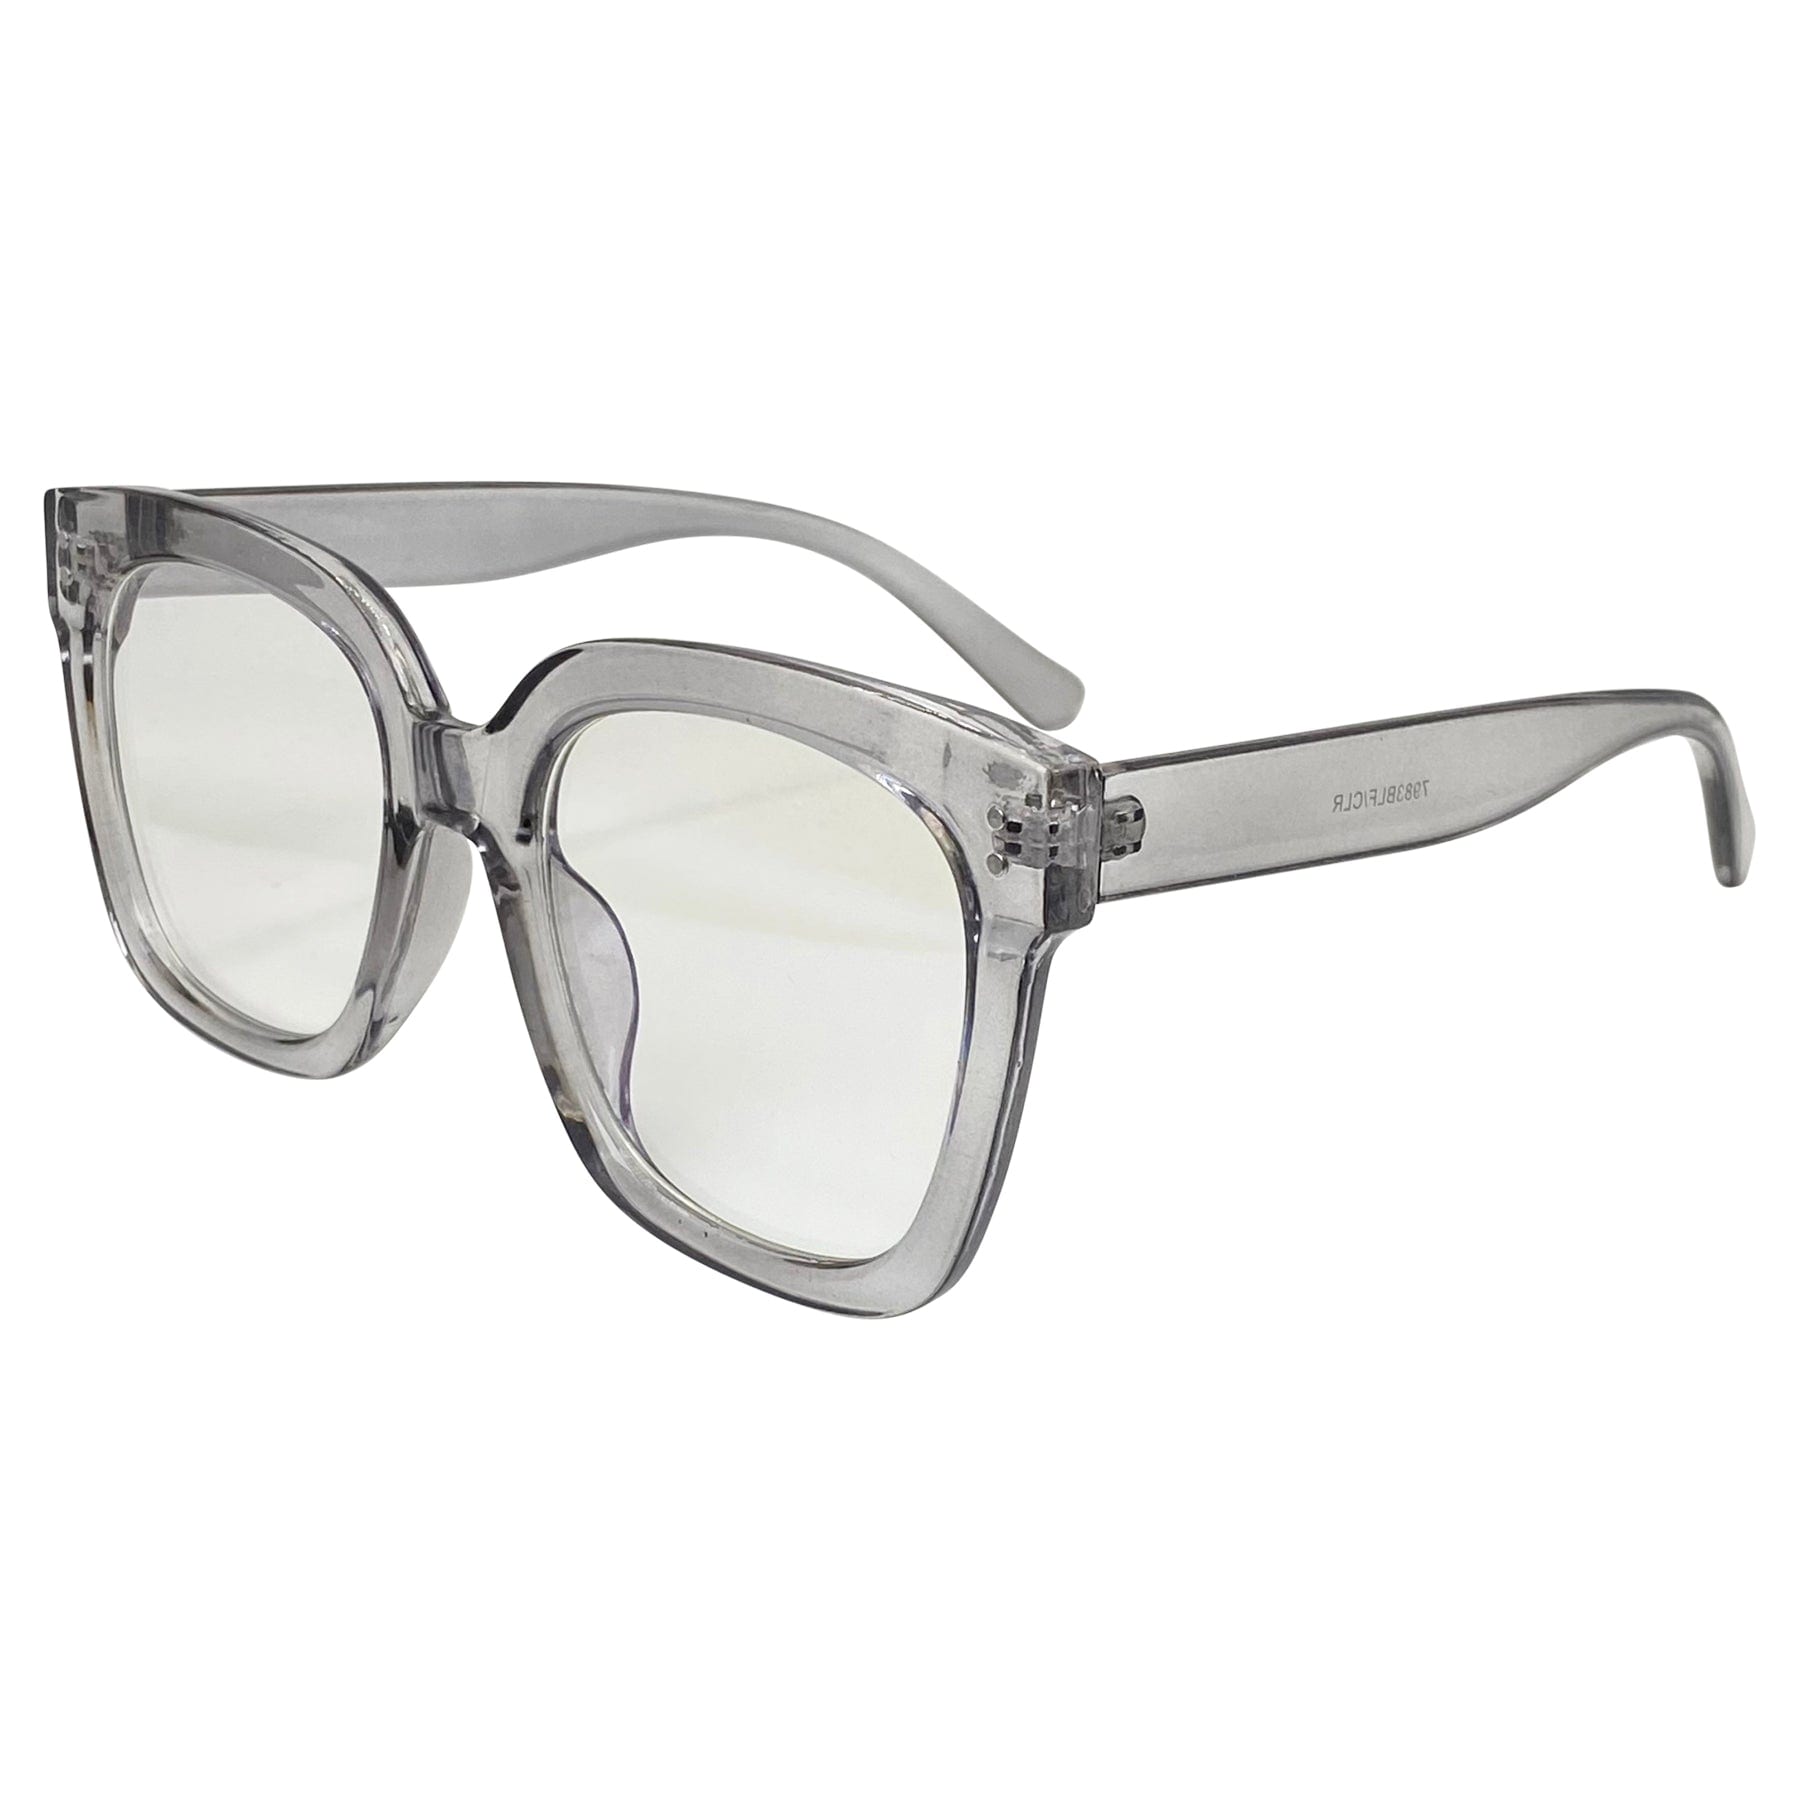 crystal gray vintage inspired frames with blue light clear lenses